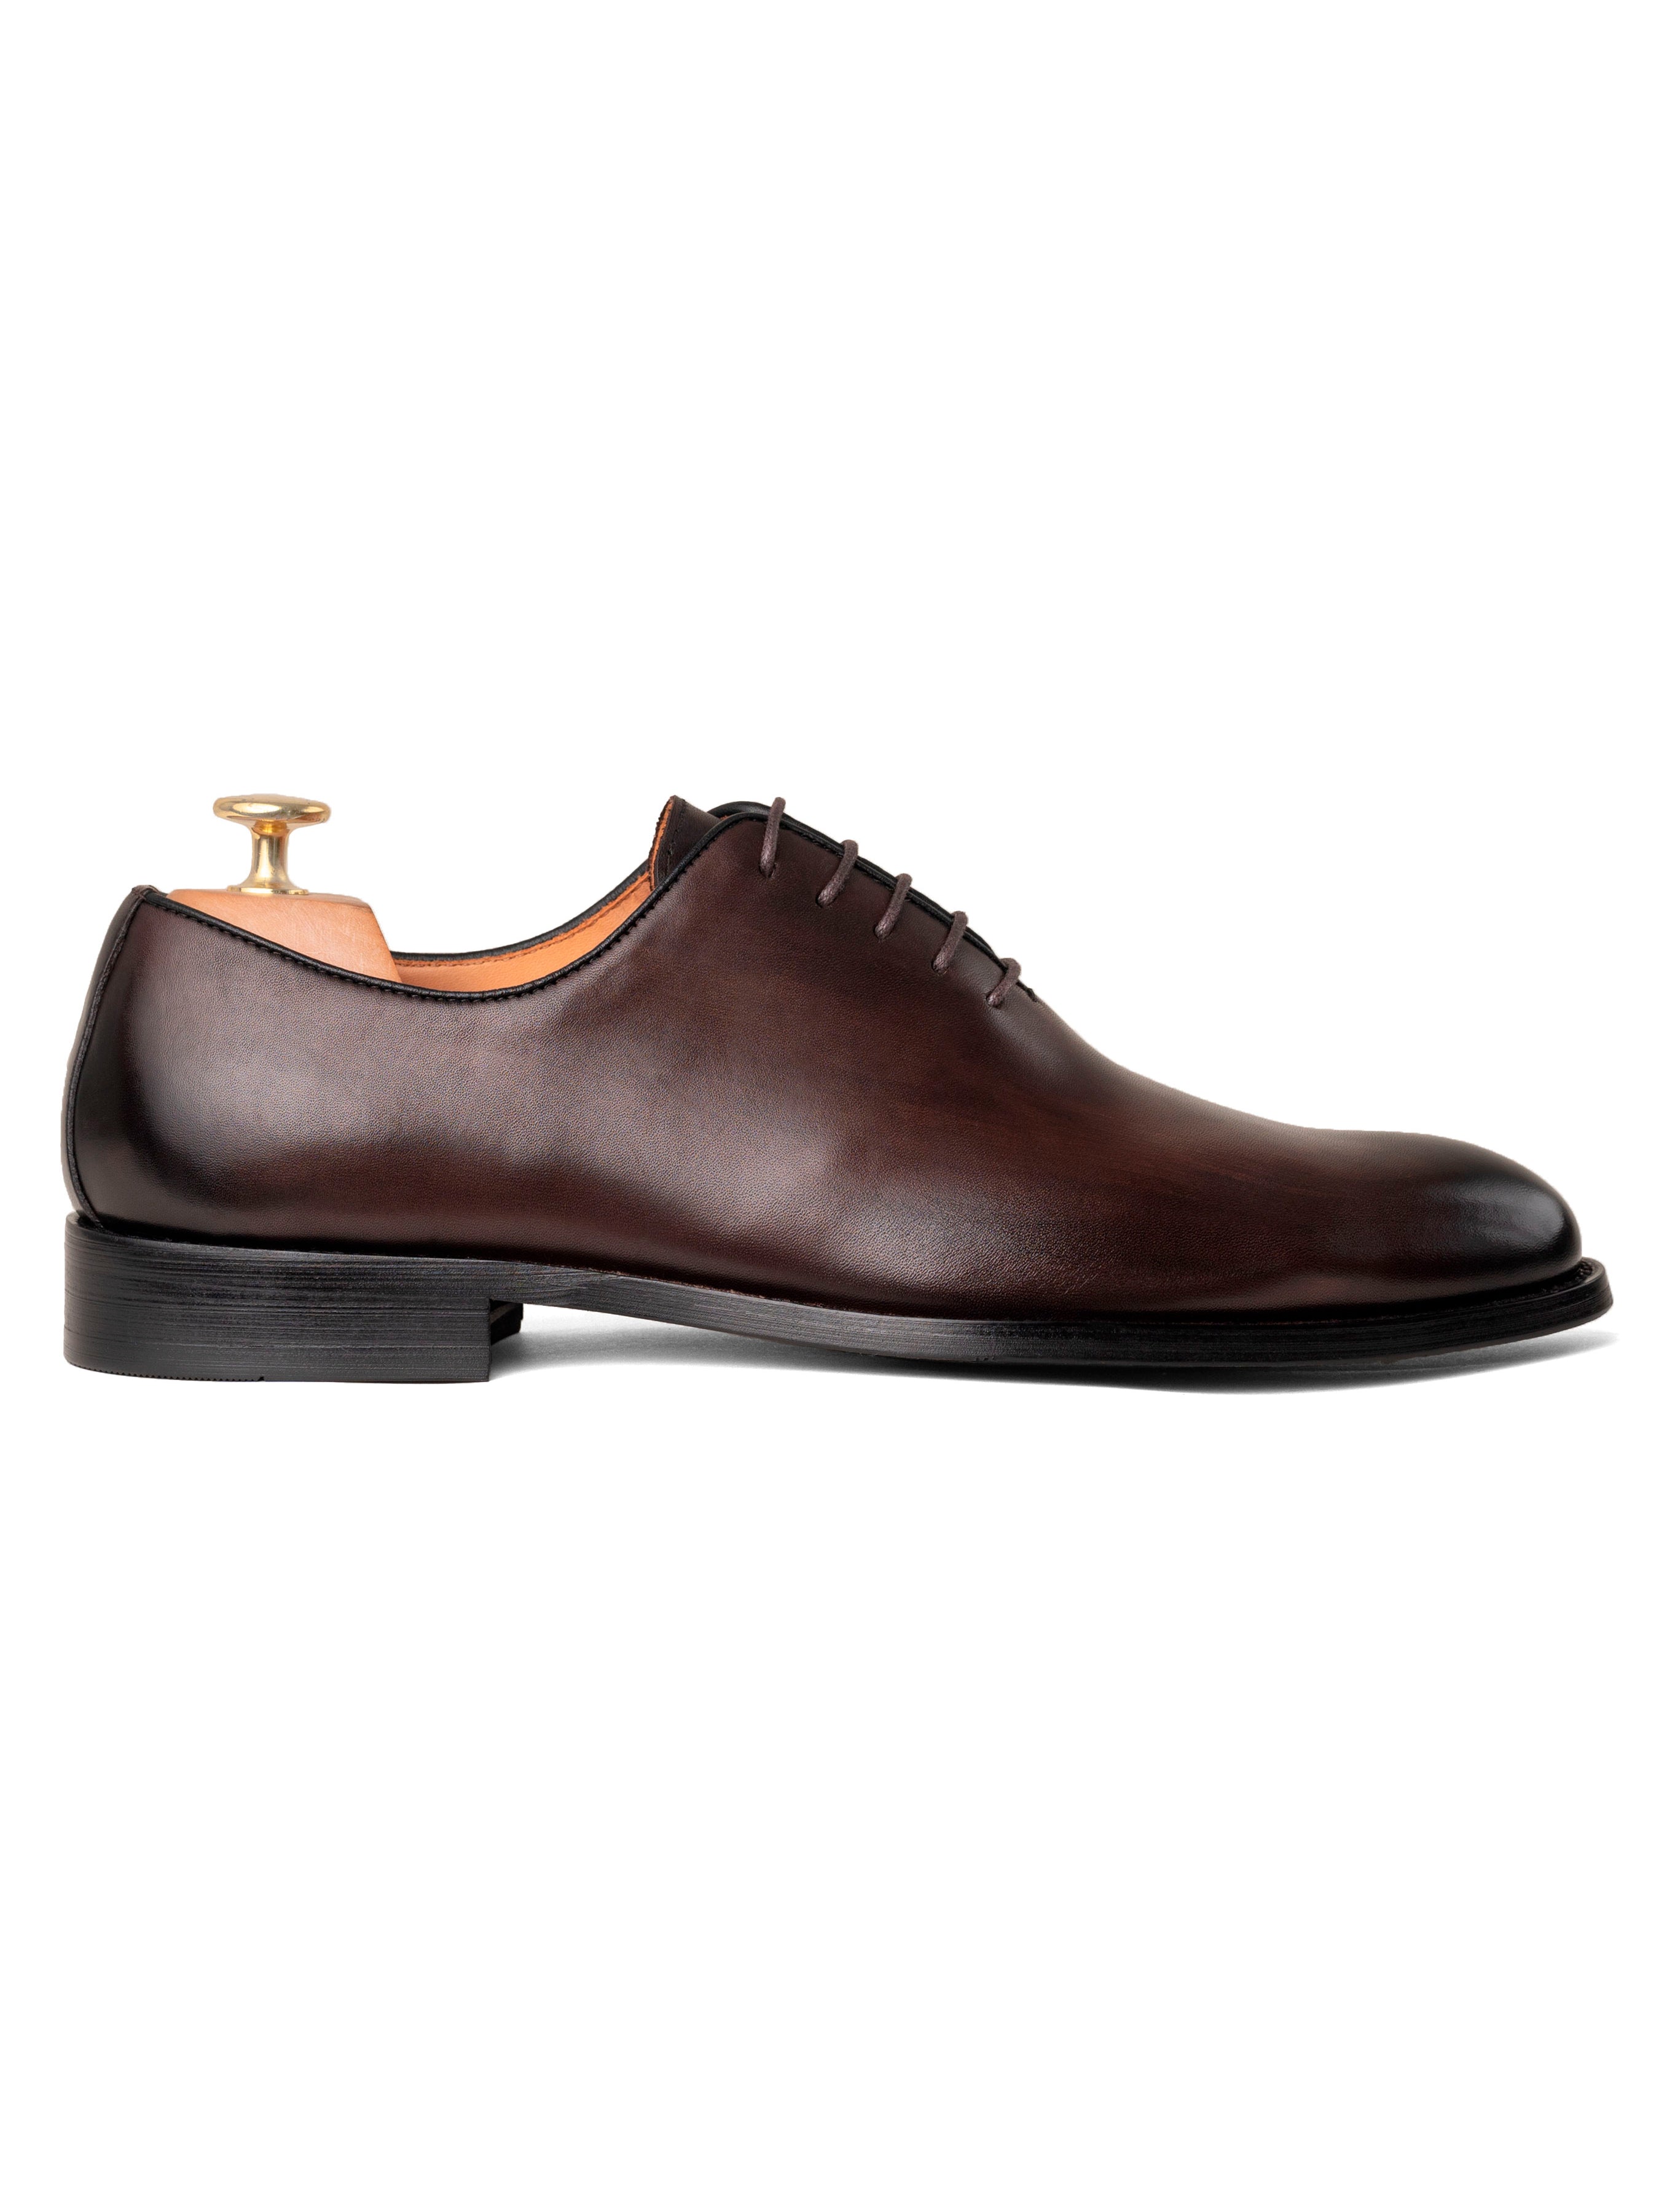 Wholecut Oxford - Dark Brown Lace up (Hand Painted Patina) | Zeve Shoes